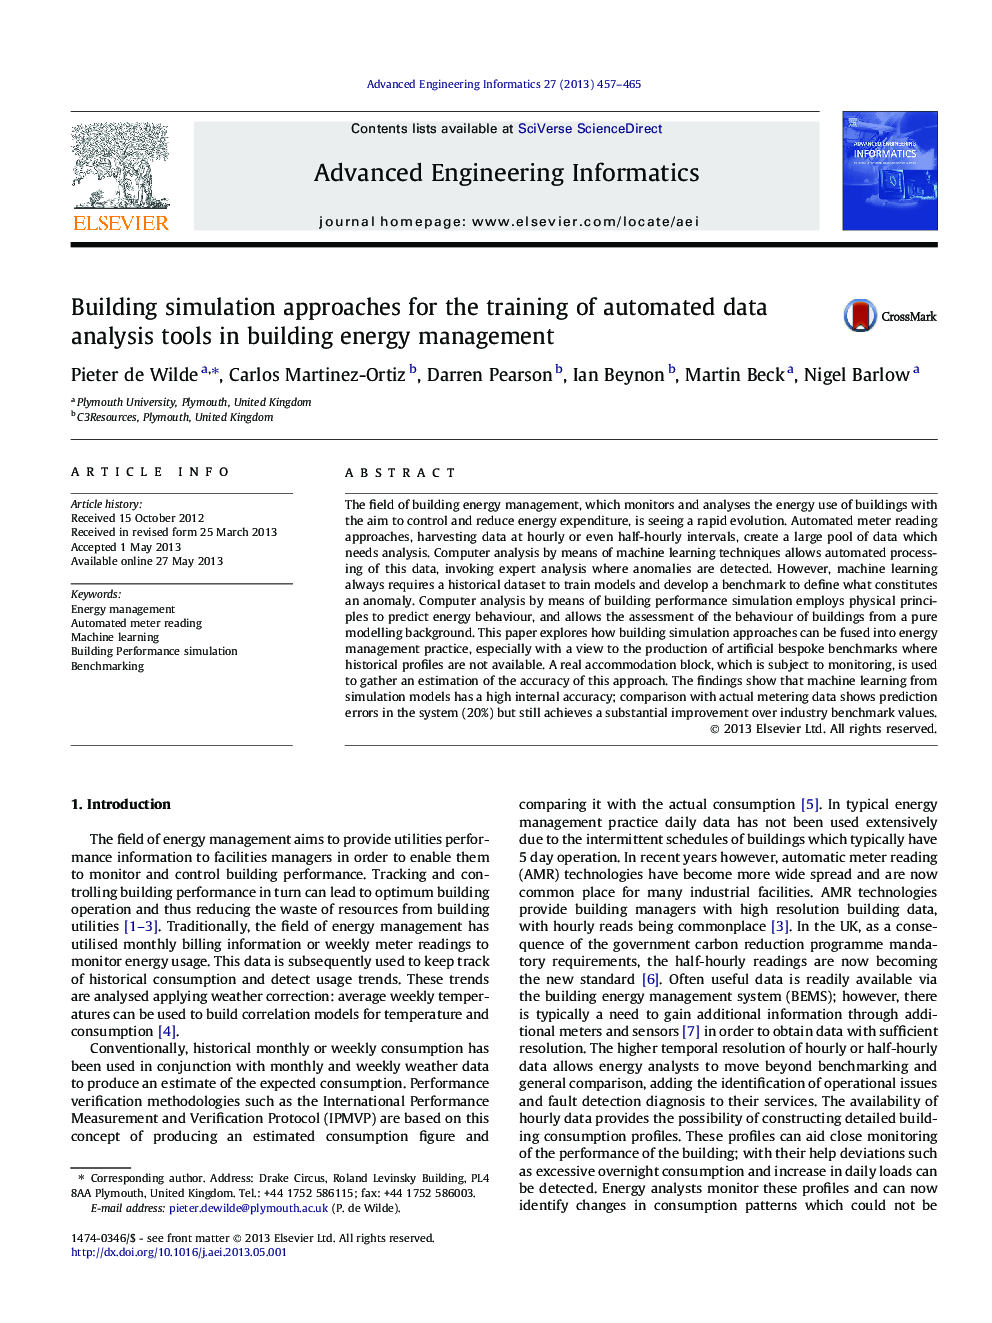 Building simulation approaches for the training of automated data analysis tools in building energy management